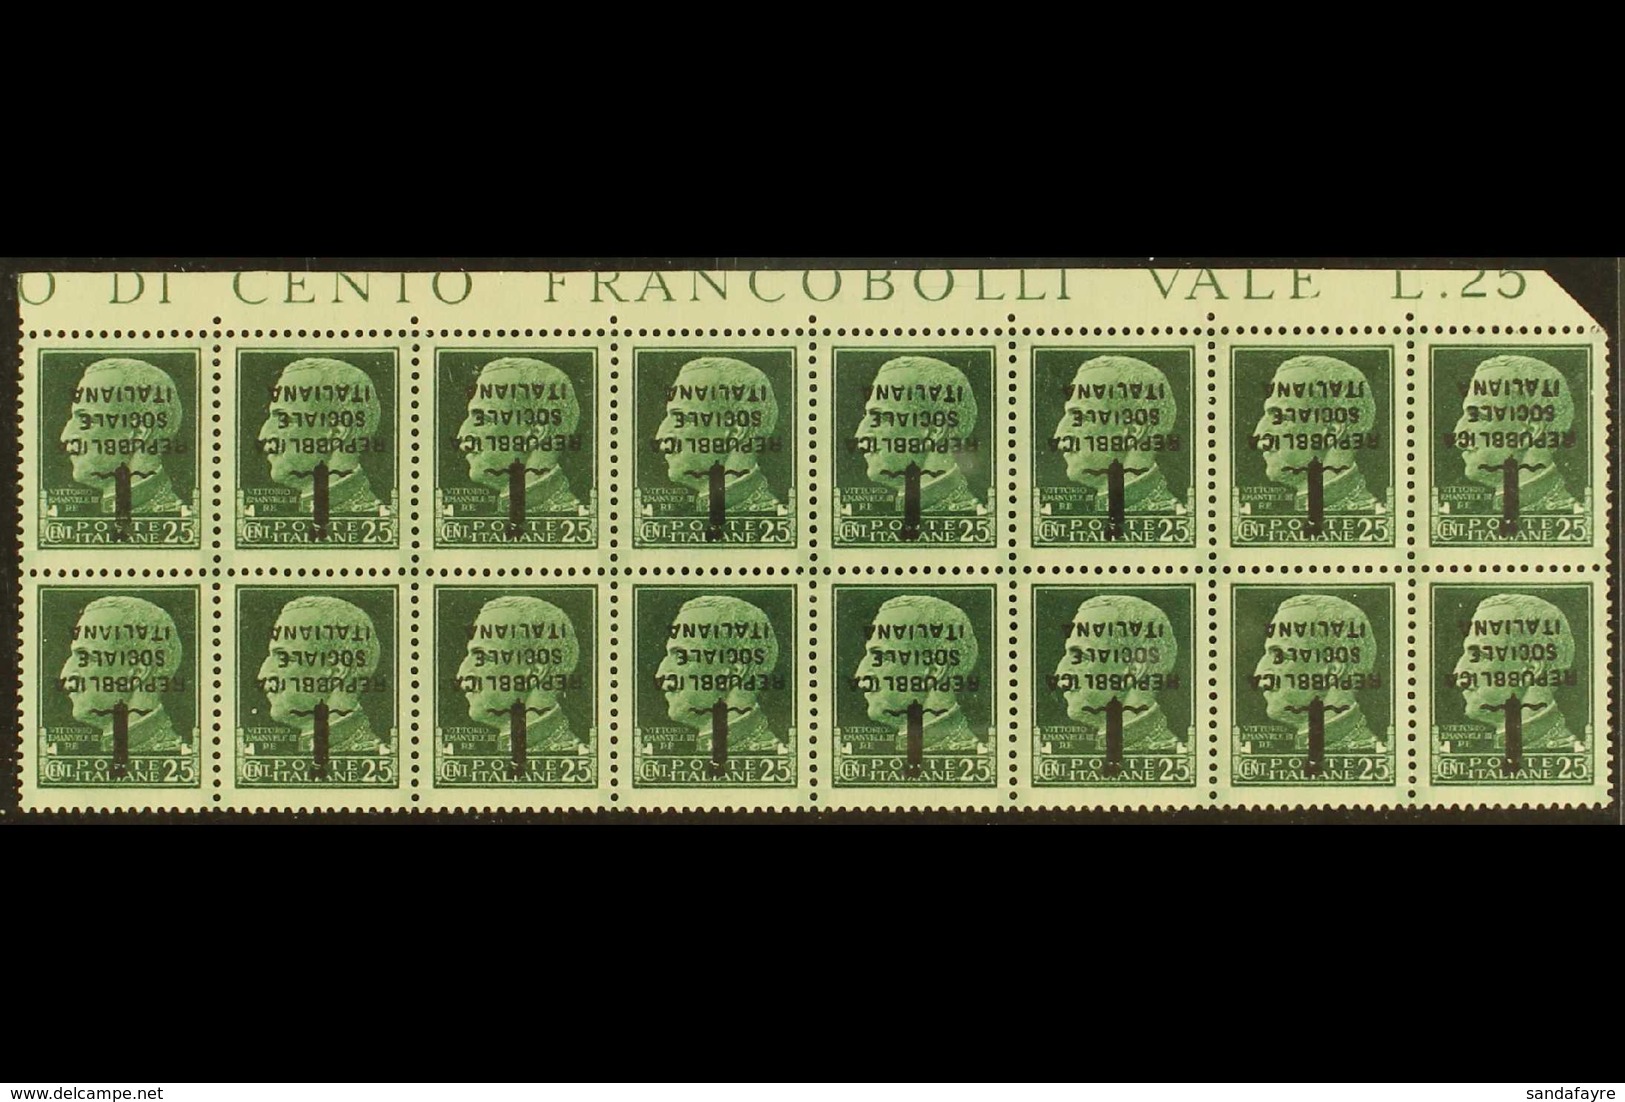 ITALIAN SOCIAL REPUBLIC (R.S.I.) 1944 25c Green Florence Overprint, With "OVERPRINT INVERTED" Variety, Sassone 491a, A S - Unclassified